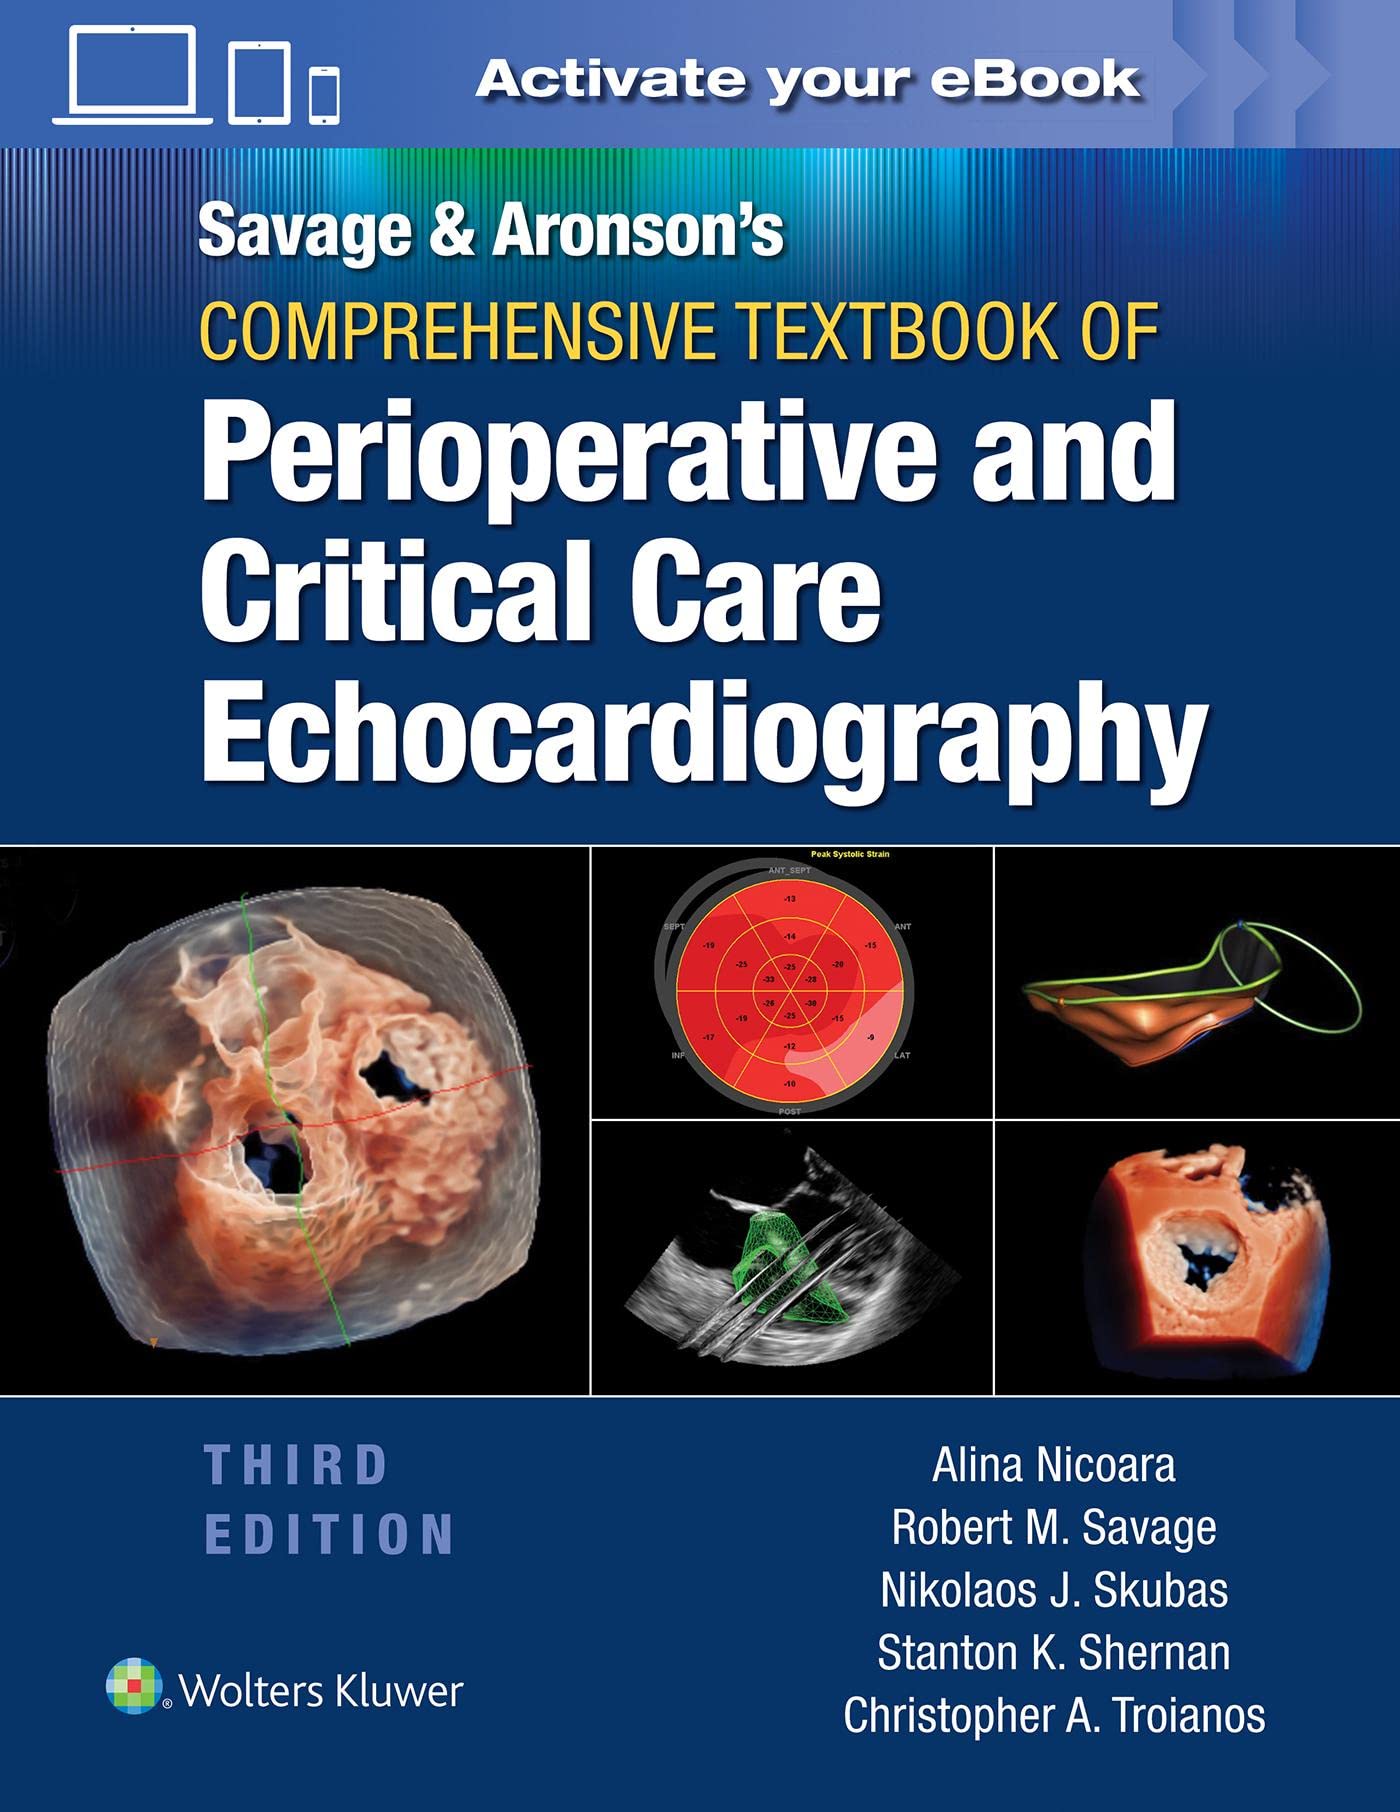 Savage ＆amp; Aronson s Comprehensive Textbook of Perioperative and Critical Care Echocardiography, 3rd edition by Robert M. Savage MD FACC 